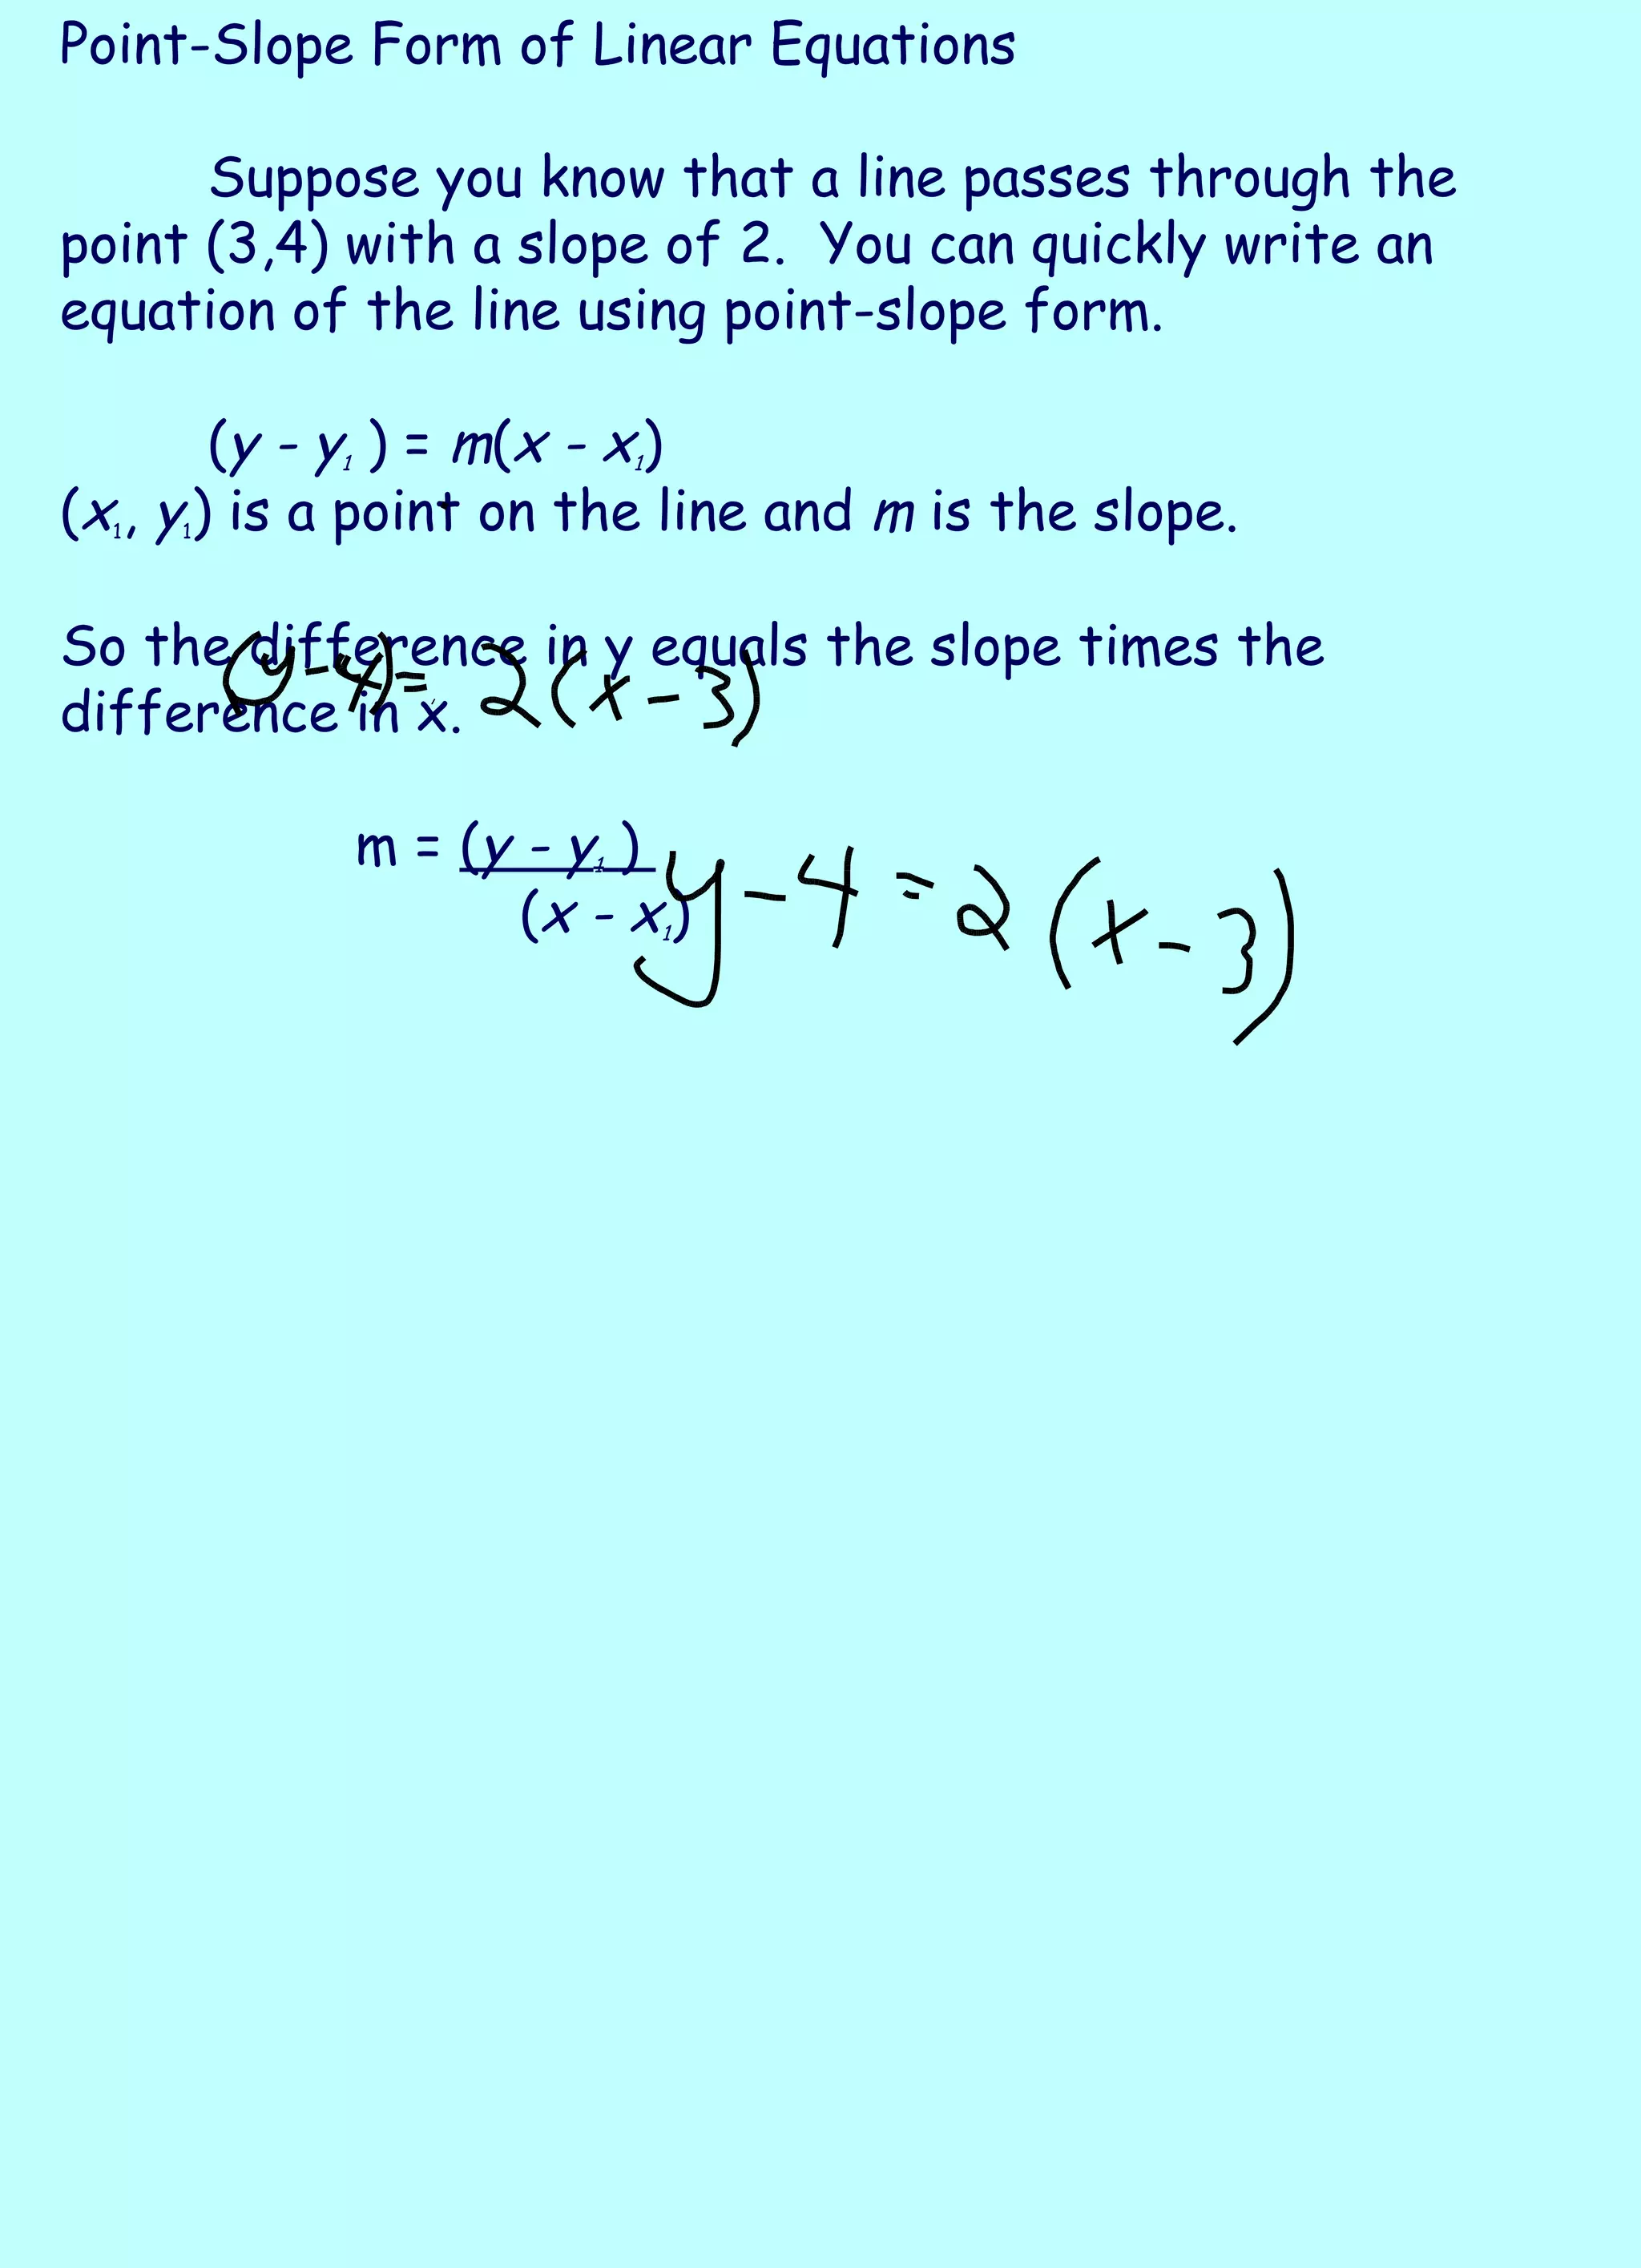 point slope form of a linear equation